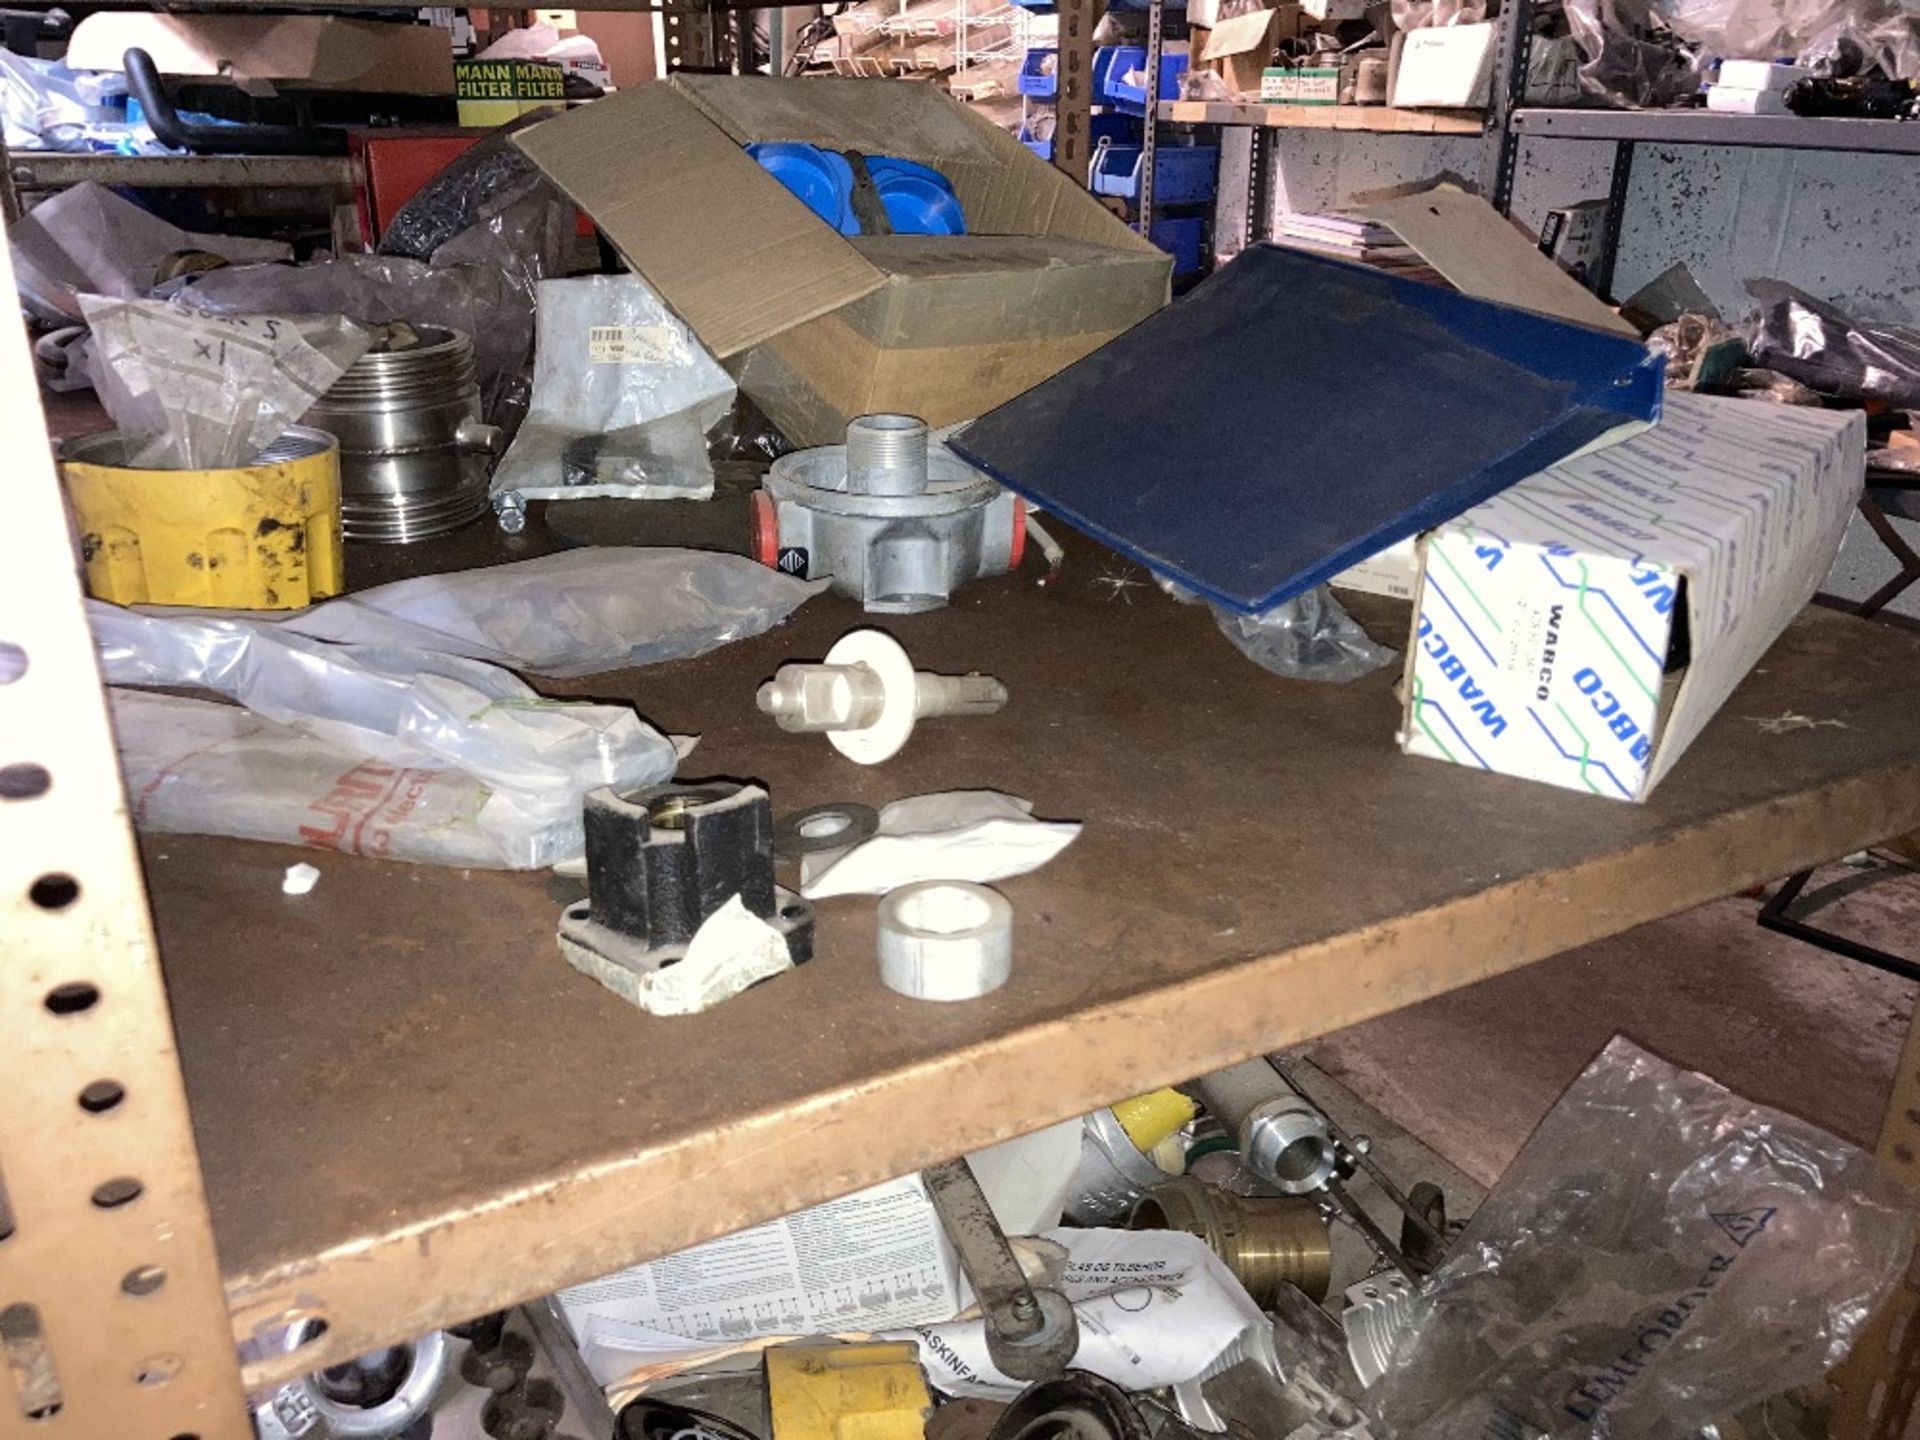 Content of Parts Room Containing Large Quantity of Various Parts & Components - Image 125 of 150